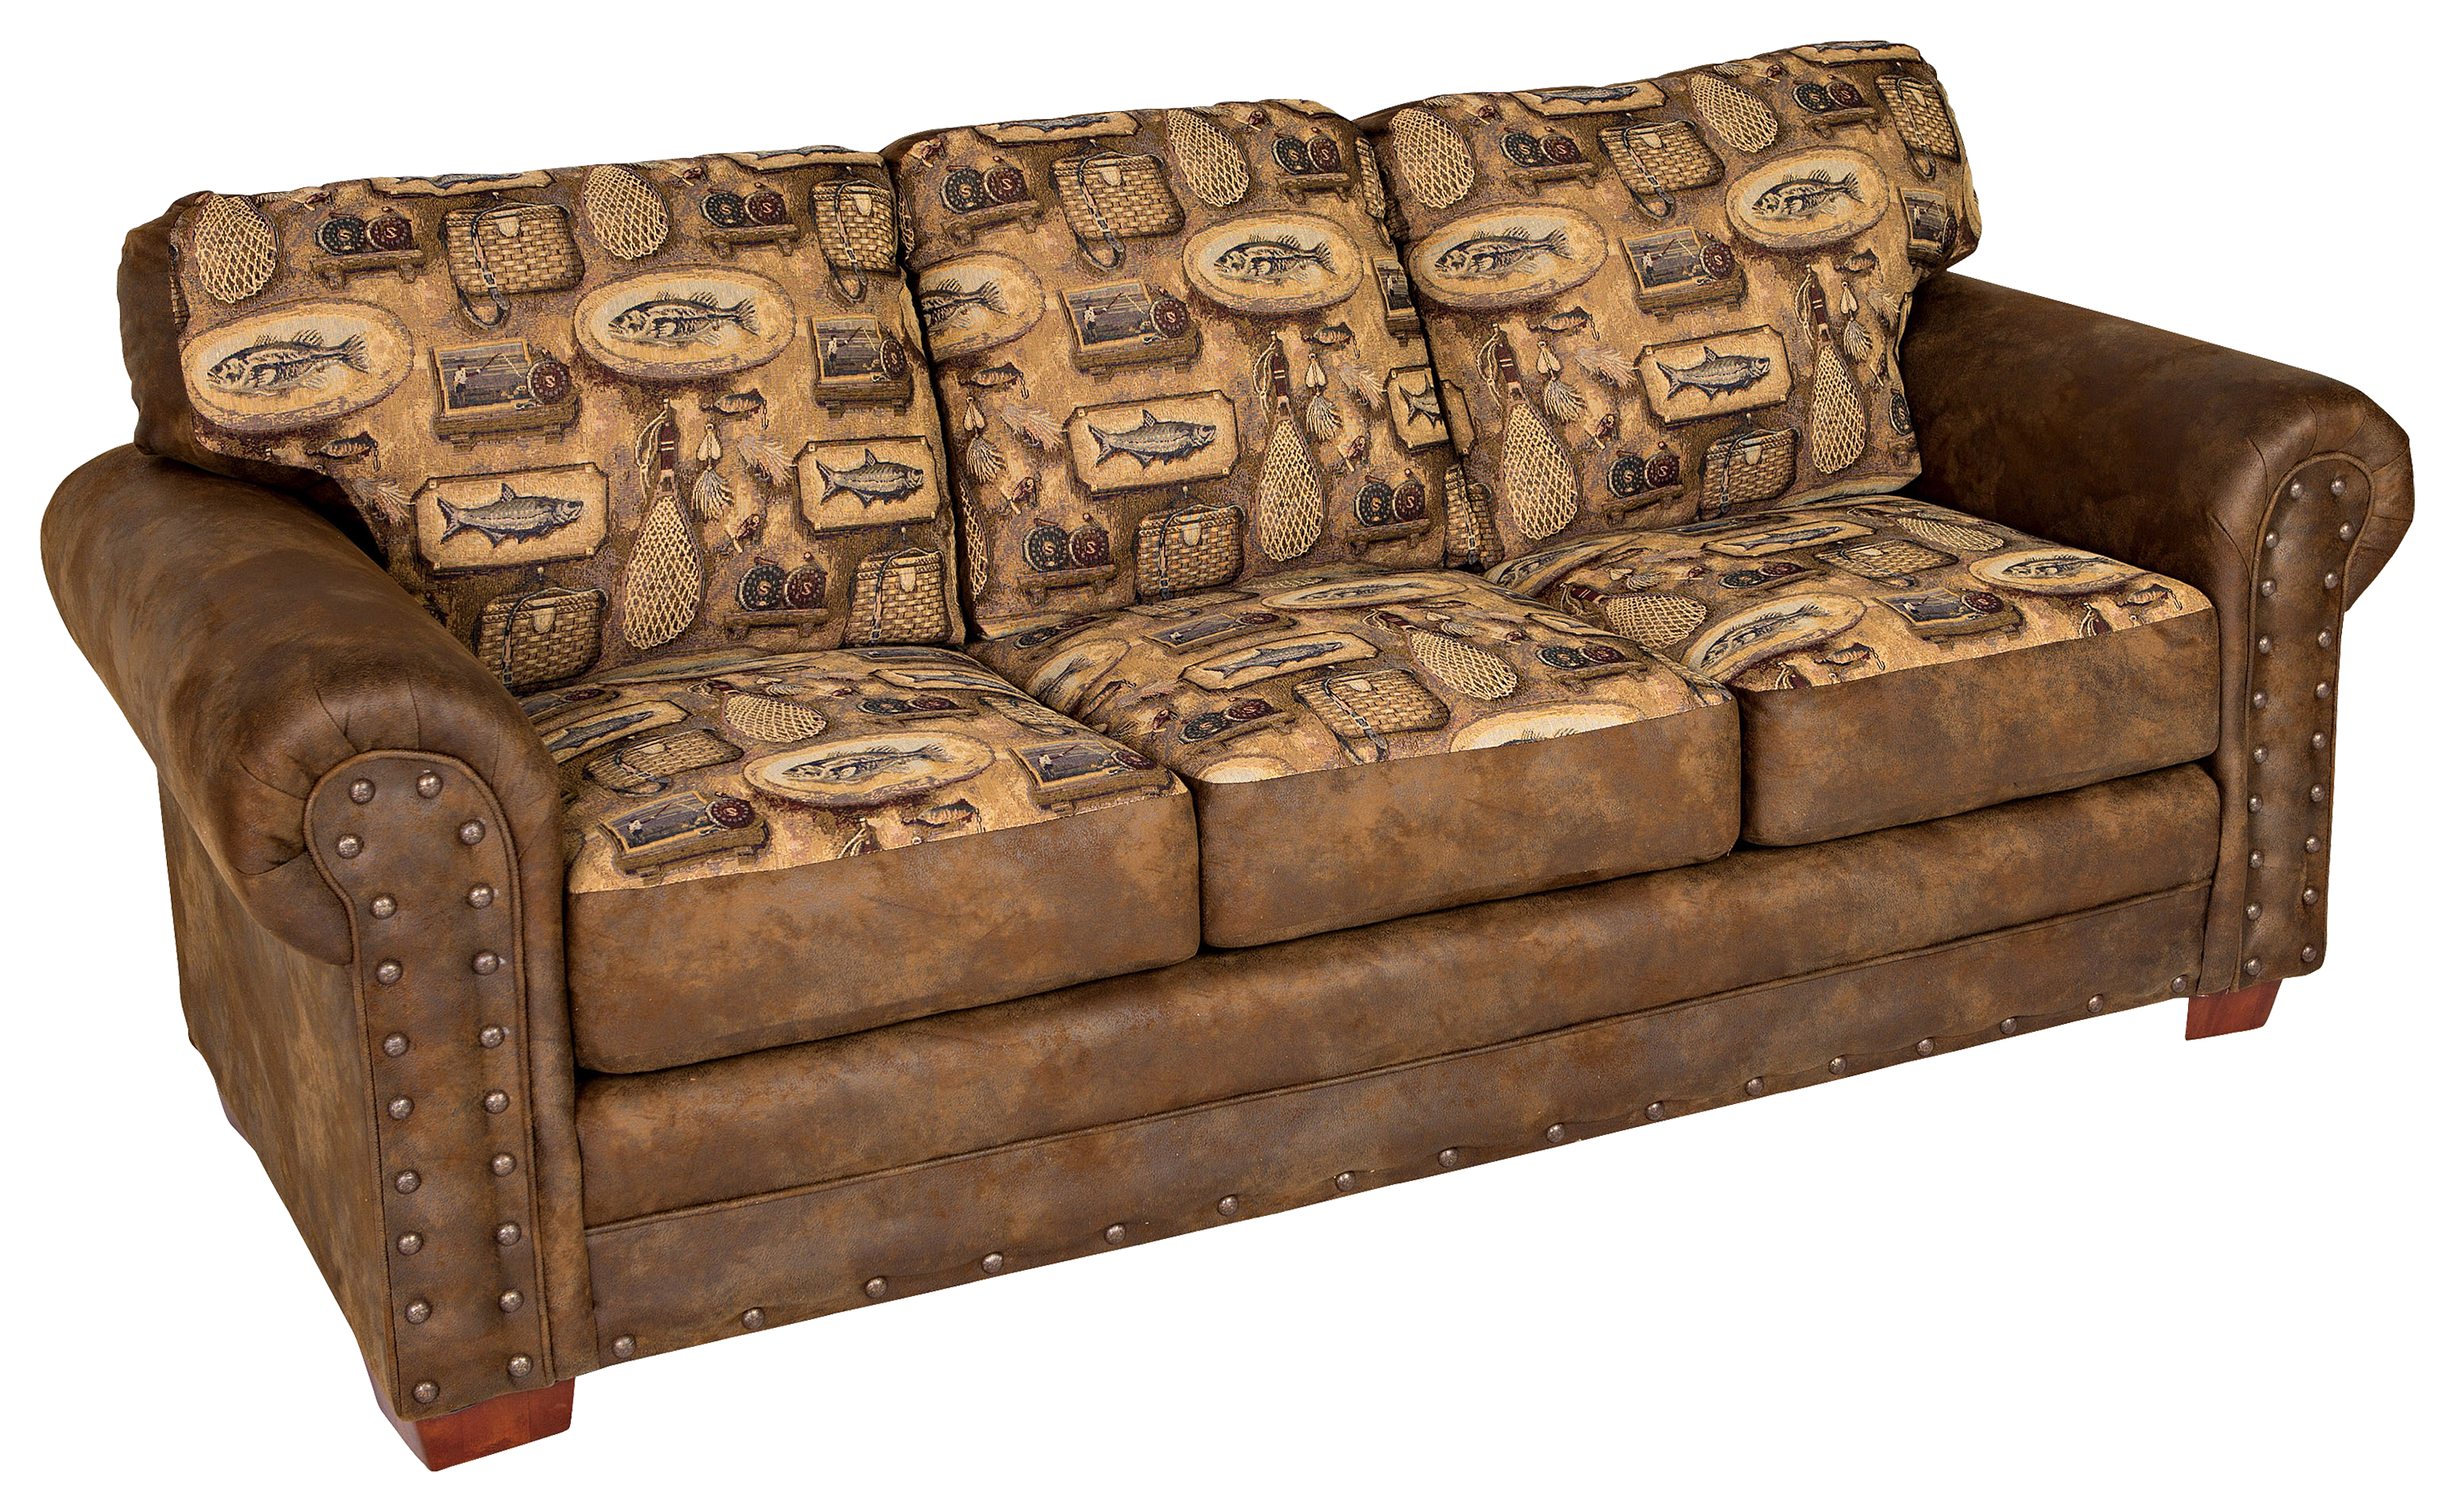 American Furniture Classics River Bend Collection Sleeper Sofa